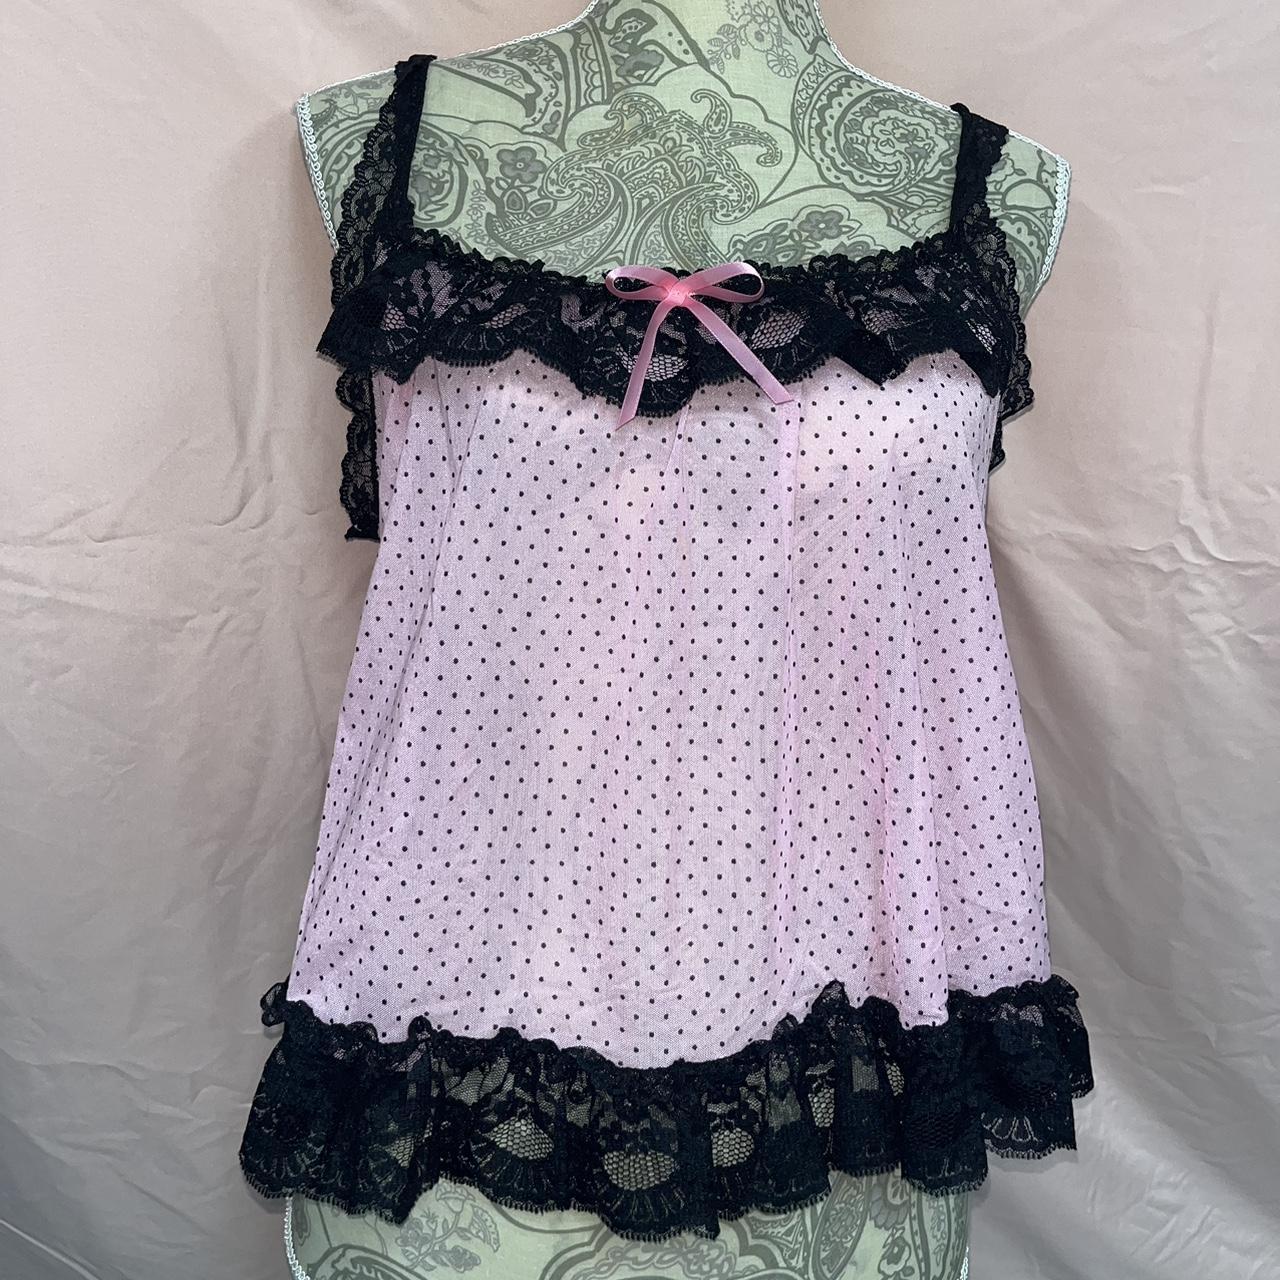 Flowy Pleated Babydoll Top With Lace by Victoria - Depop